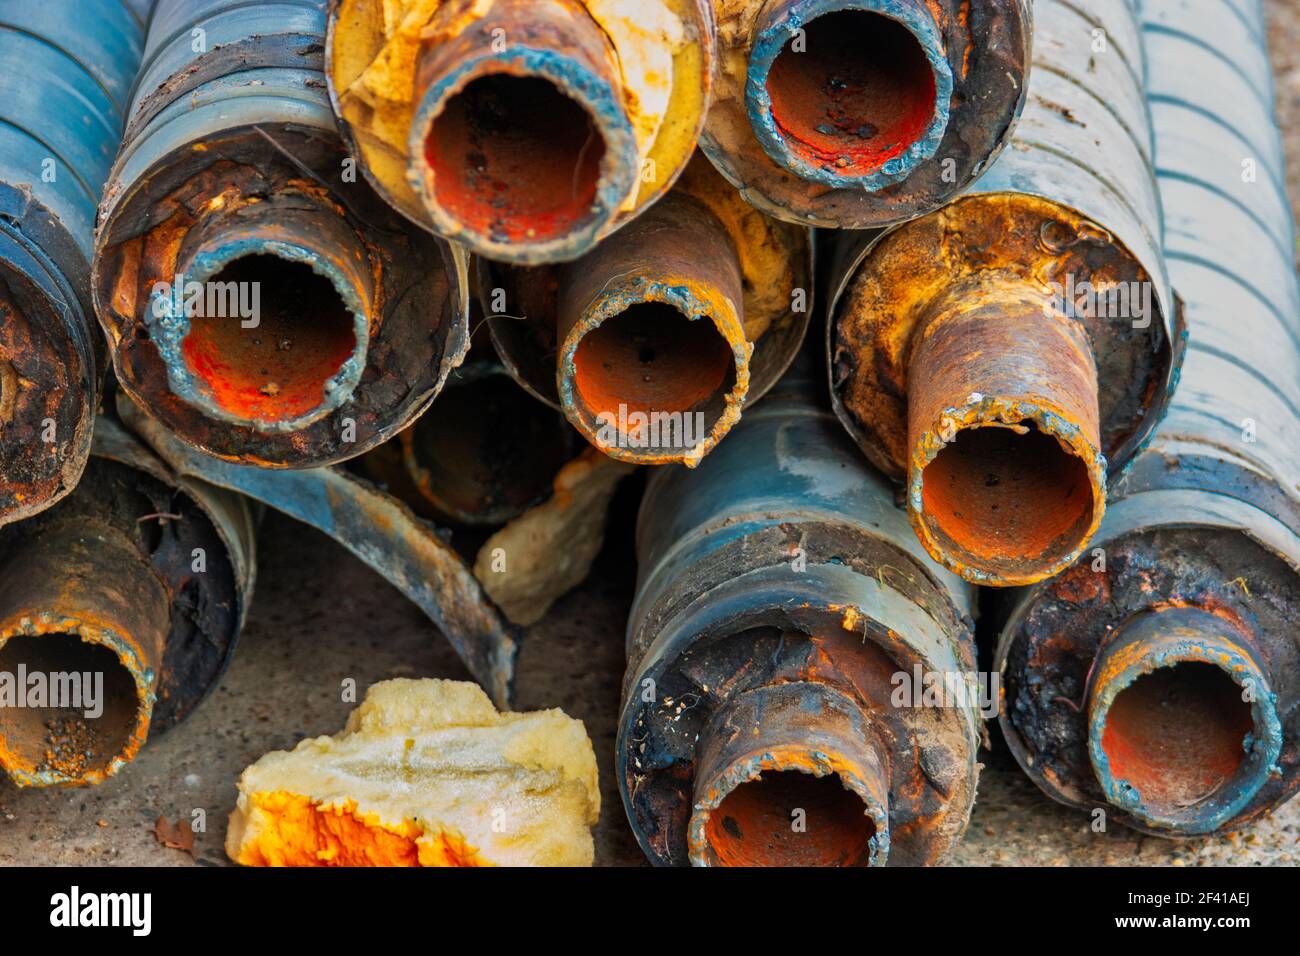 Water Pipeline repair. Large rusty steel pipe with insulation on the construction site in a plastic tube wrapper lying on the yard in a bunch horizontally. Rusty old pipeline stacked up. Water Pipeline repair. Large rusty steel pipe with insulation on the construction site in a plastic tube wrapper lying on the yard a bunch horizontally. Rusty old pipeline stacked up Stock Photo